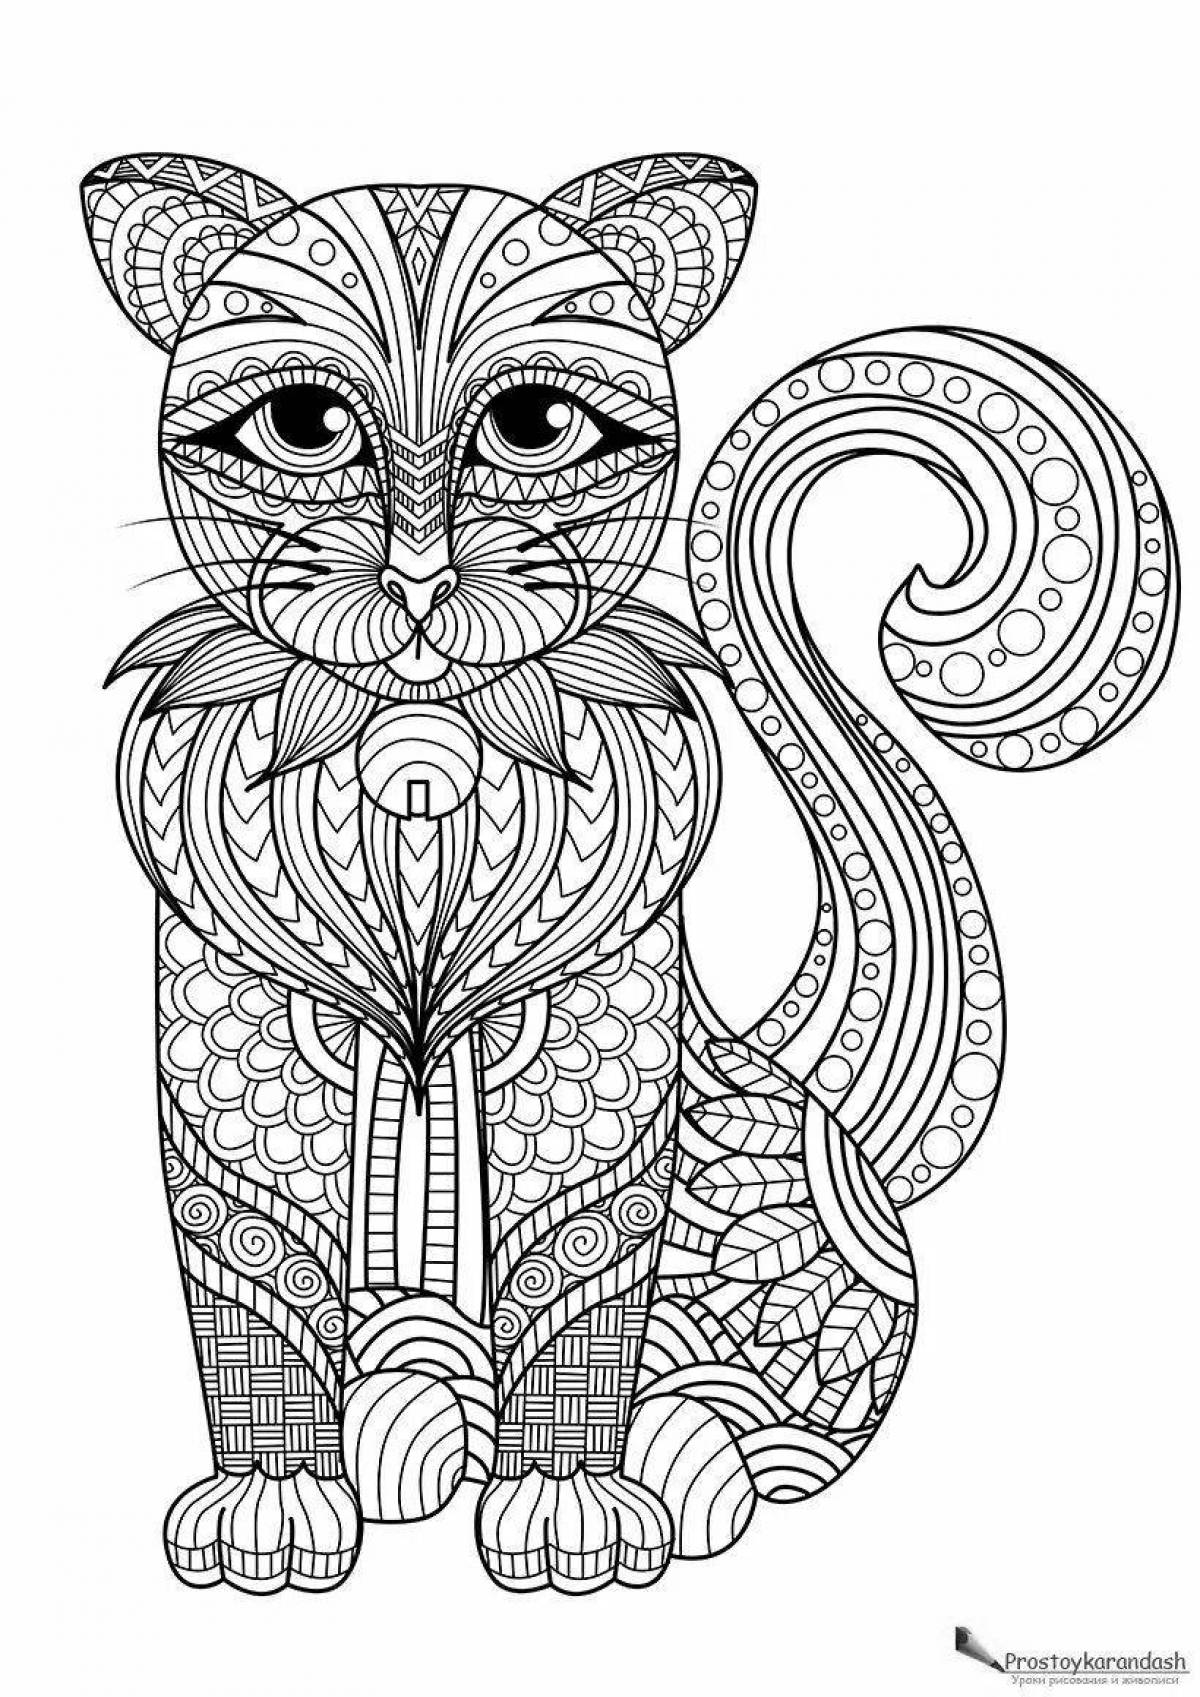 Coloring book soothing antistress cat for kids